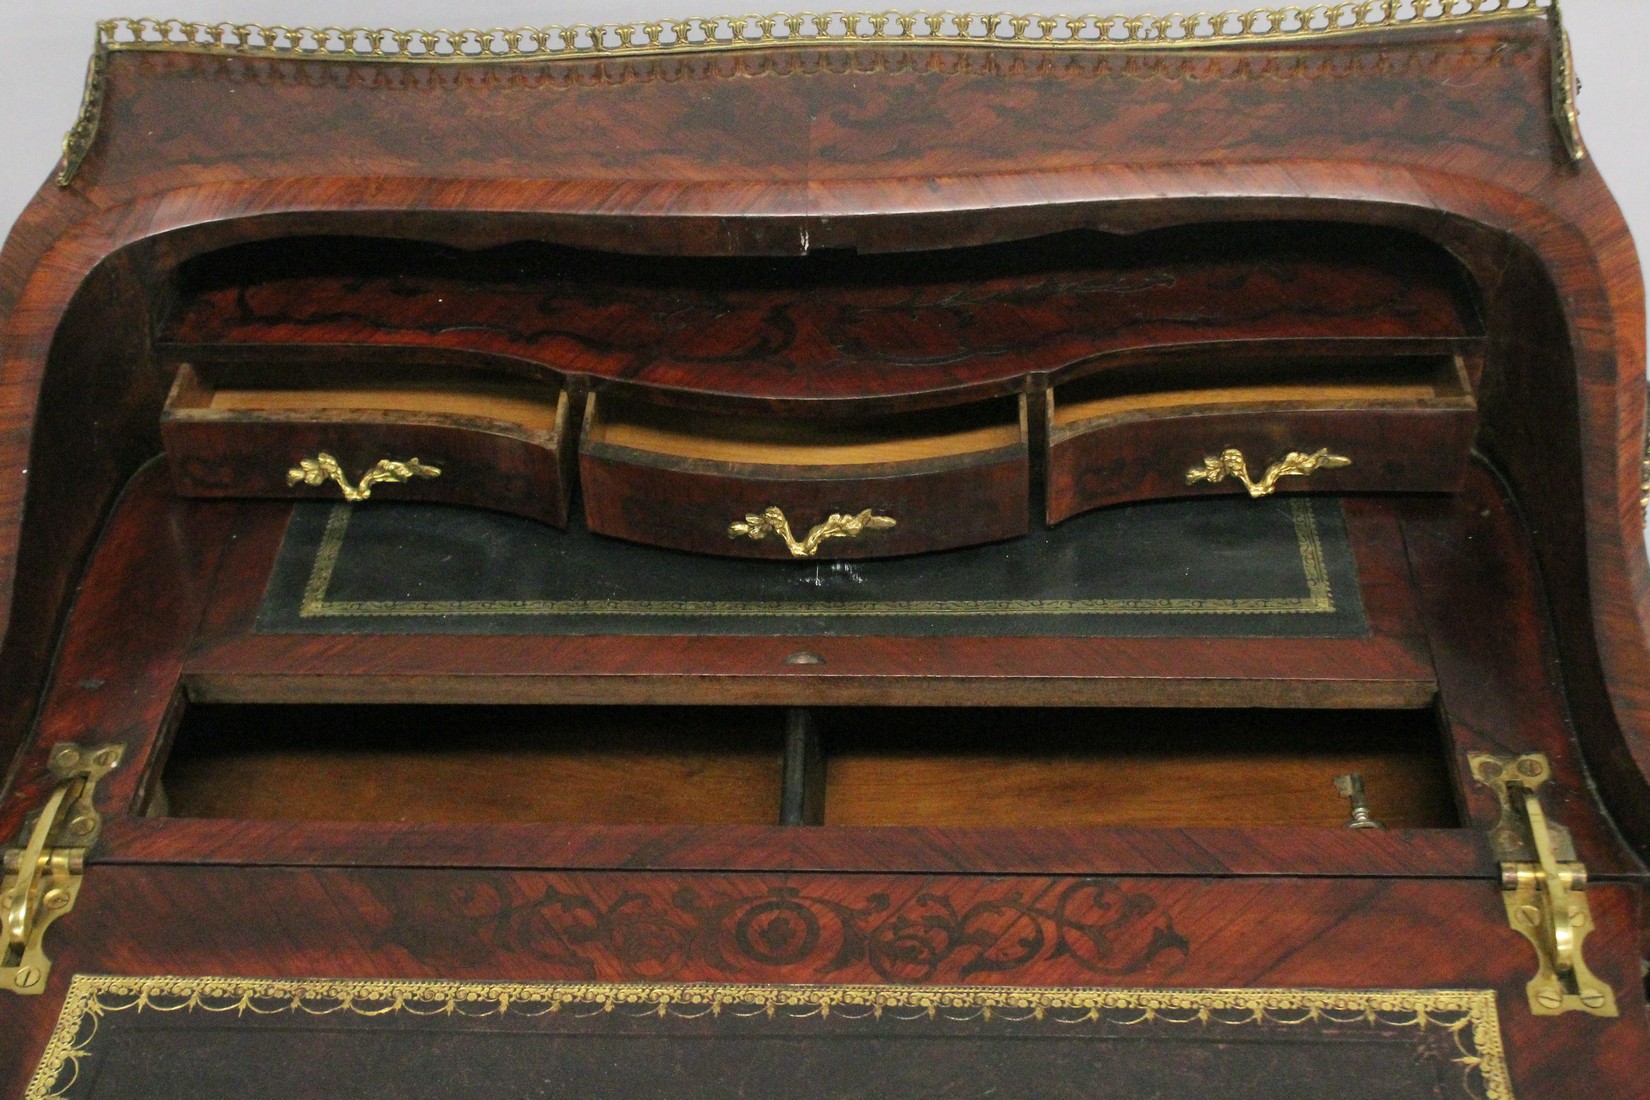 A SUPERB 19TH CENTURY LOUIS XVI STYLE KINGWOOD BUREAU with brass grill, ormolu mounts and inset with - Image 8 of 12